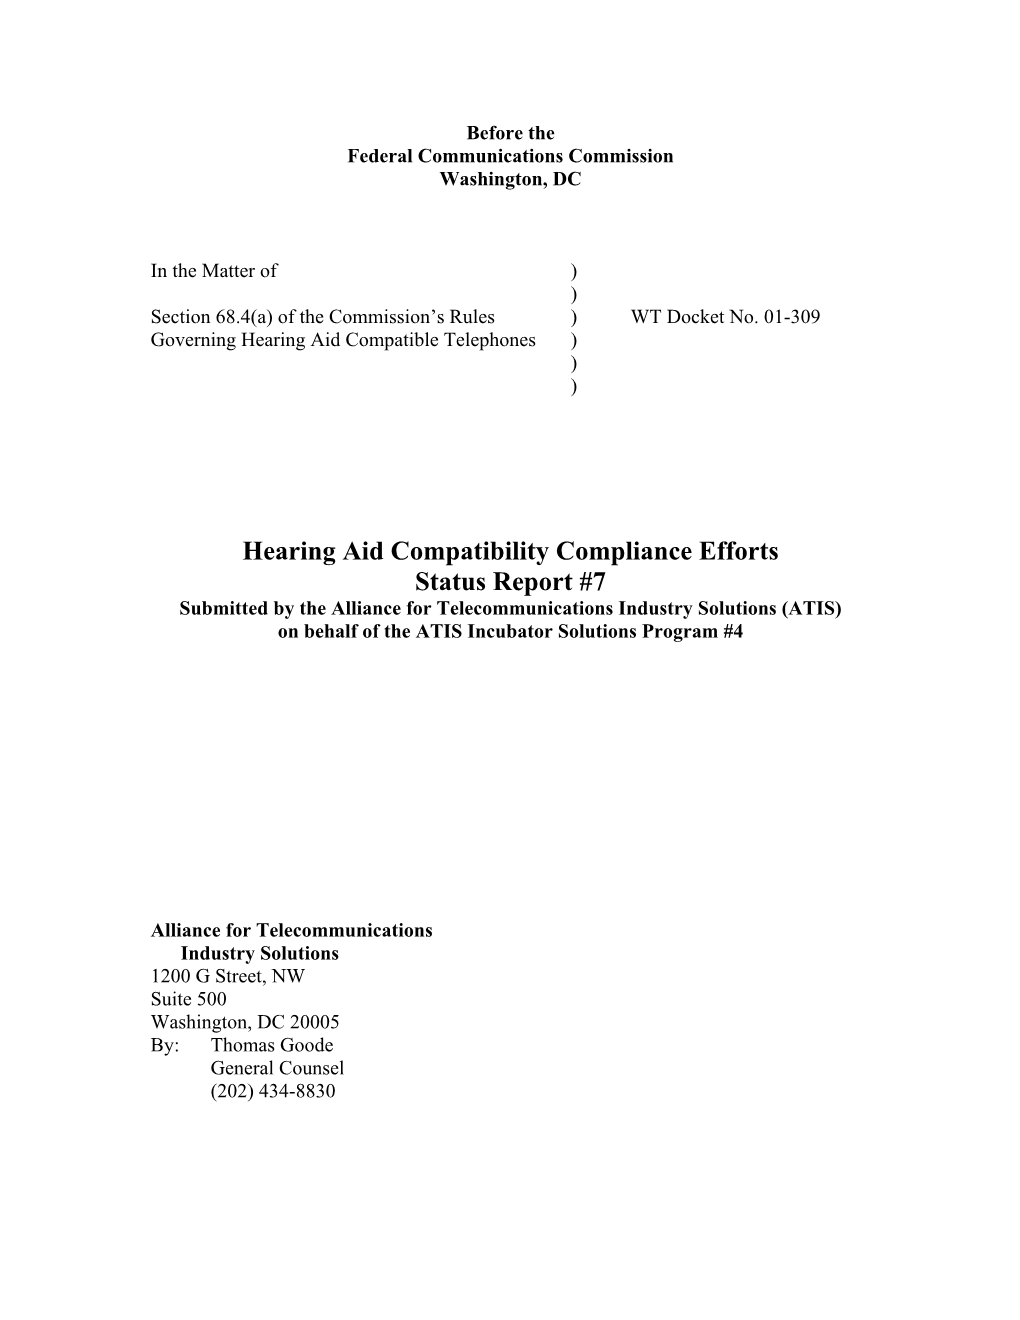 Hearing Aid Compatibility Compliance Efforts Status Report #7